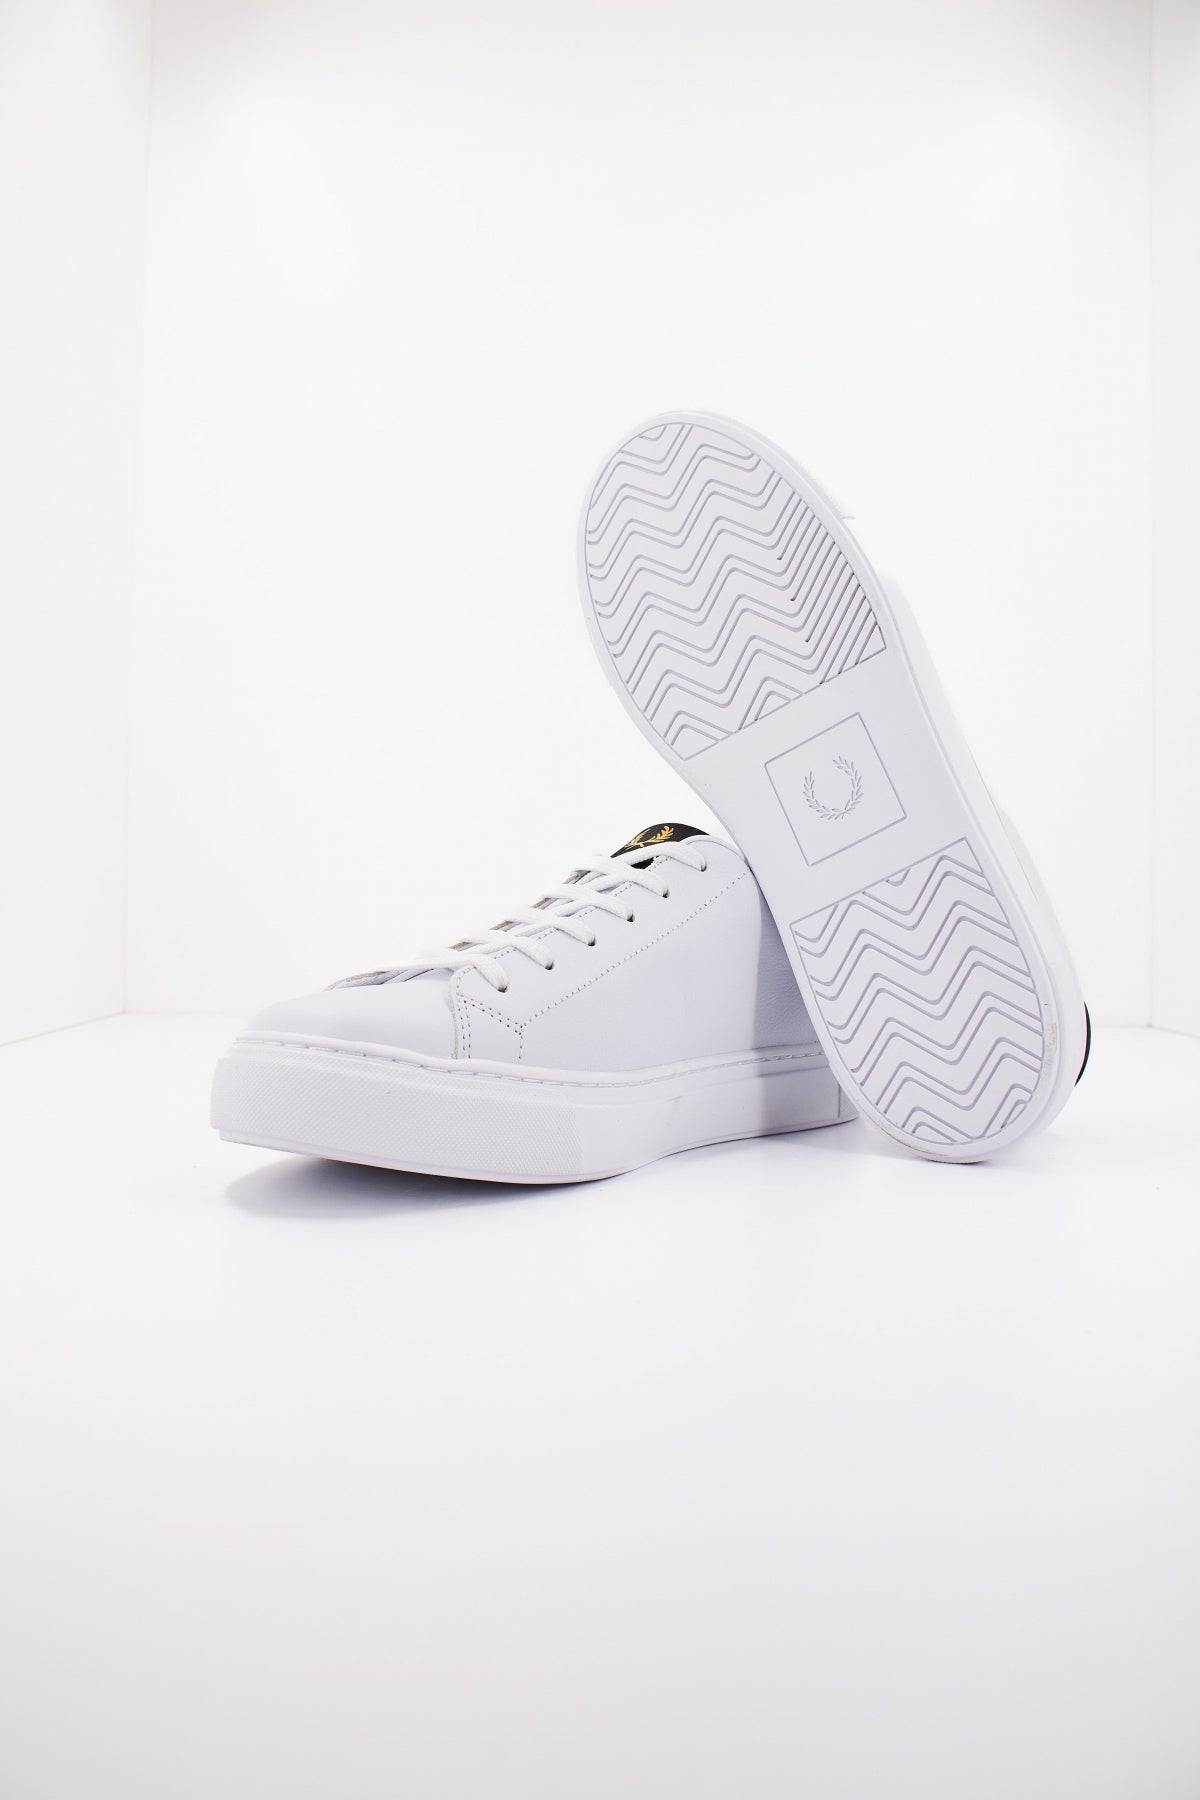 FRED PERRY B TUMBLED LEATHER en color BLANCO  (4)